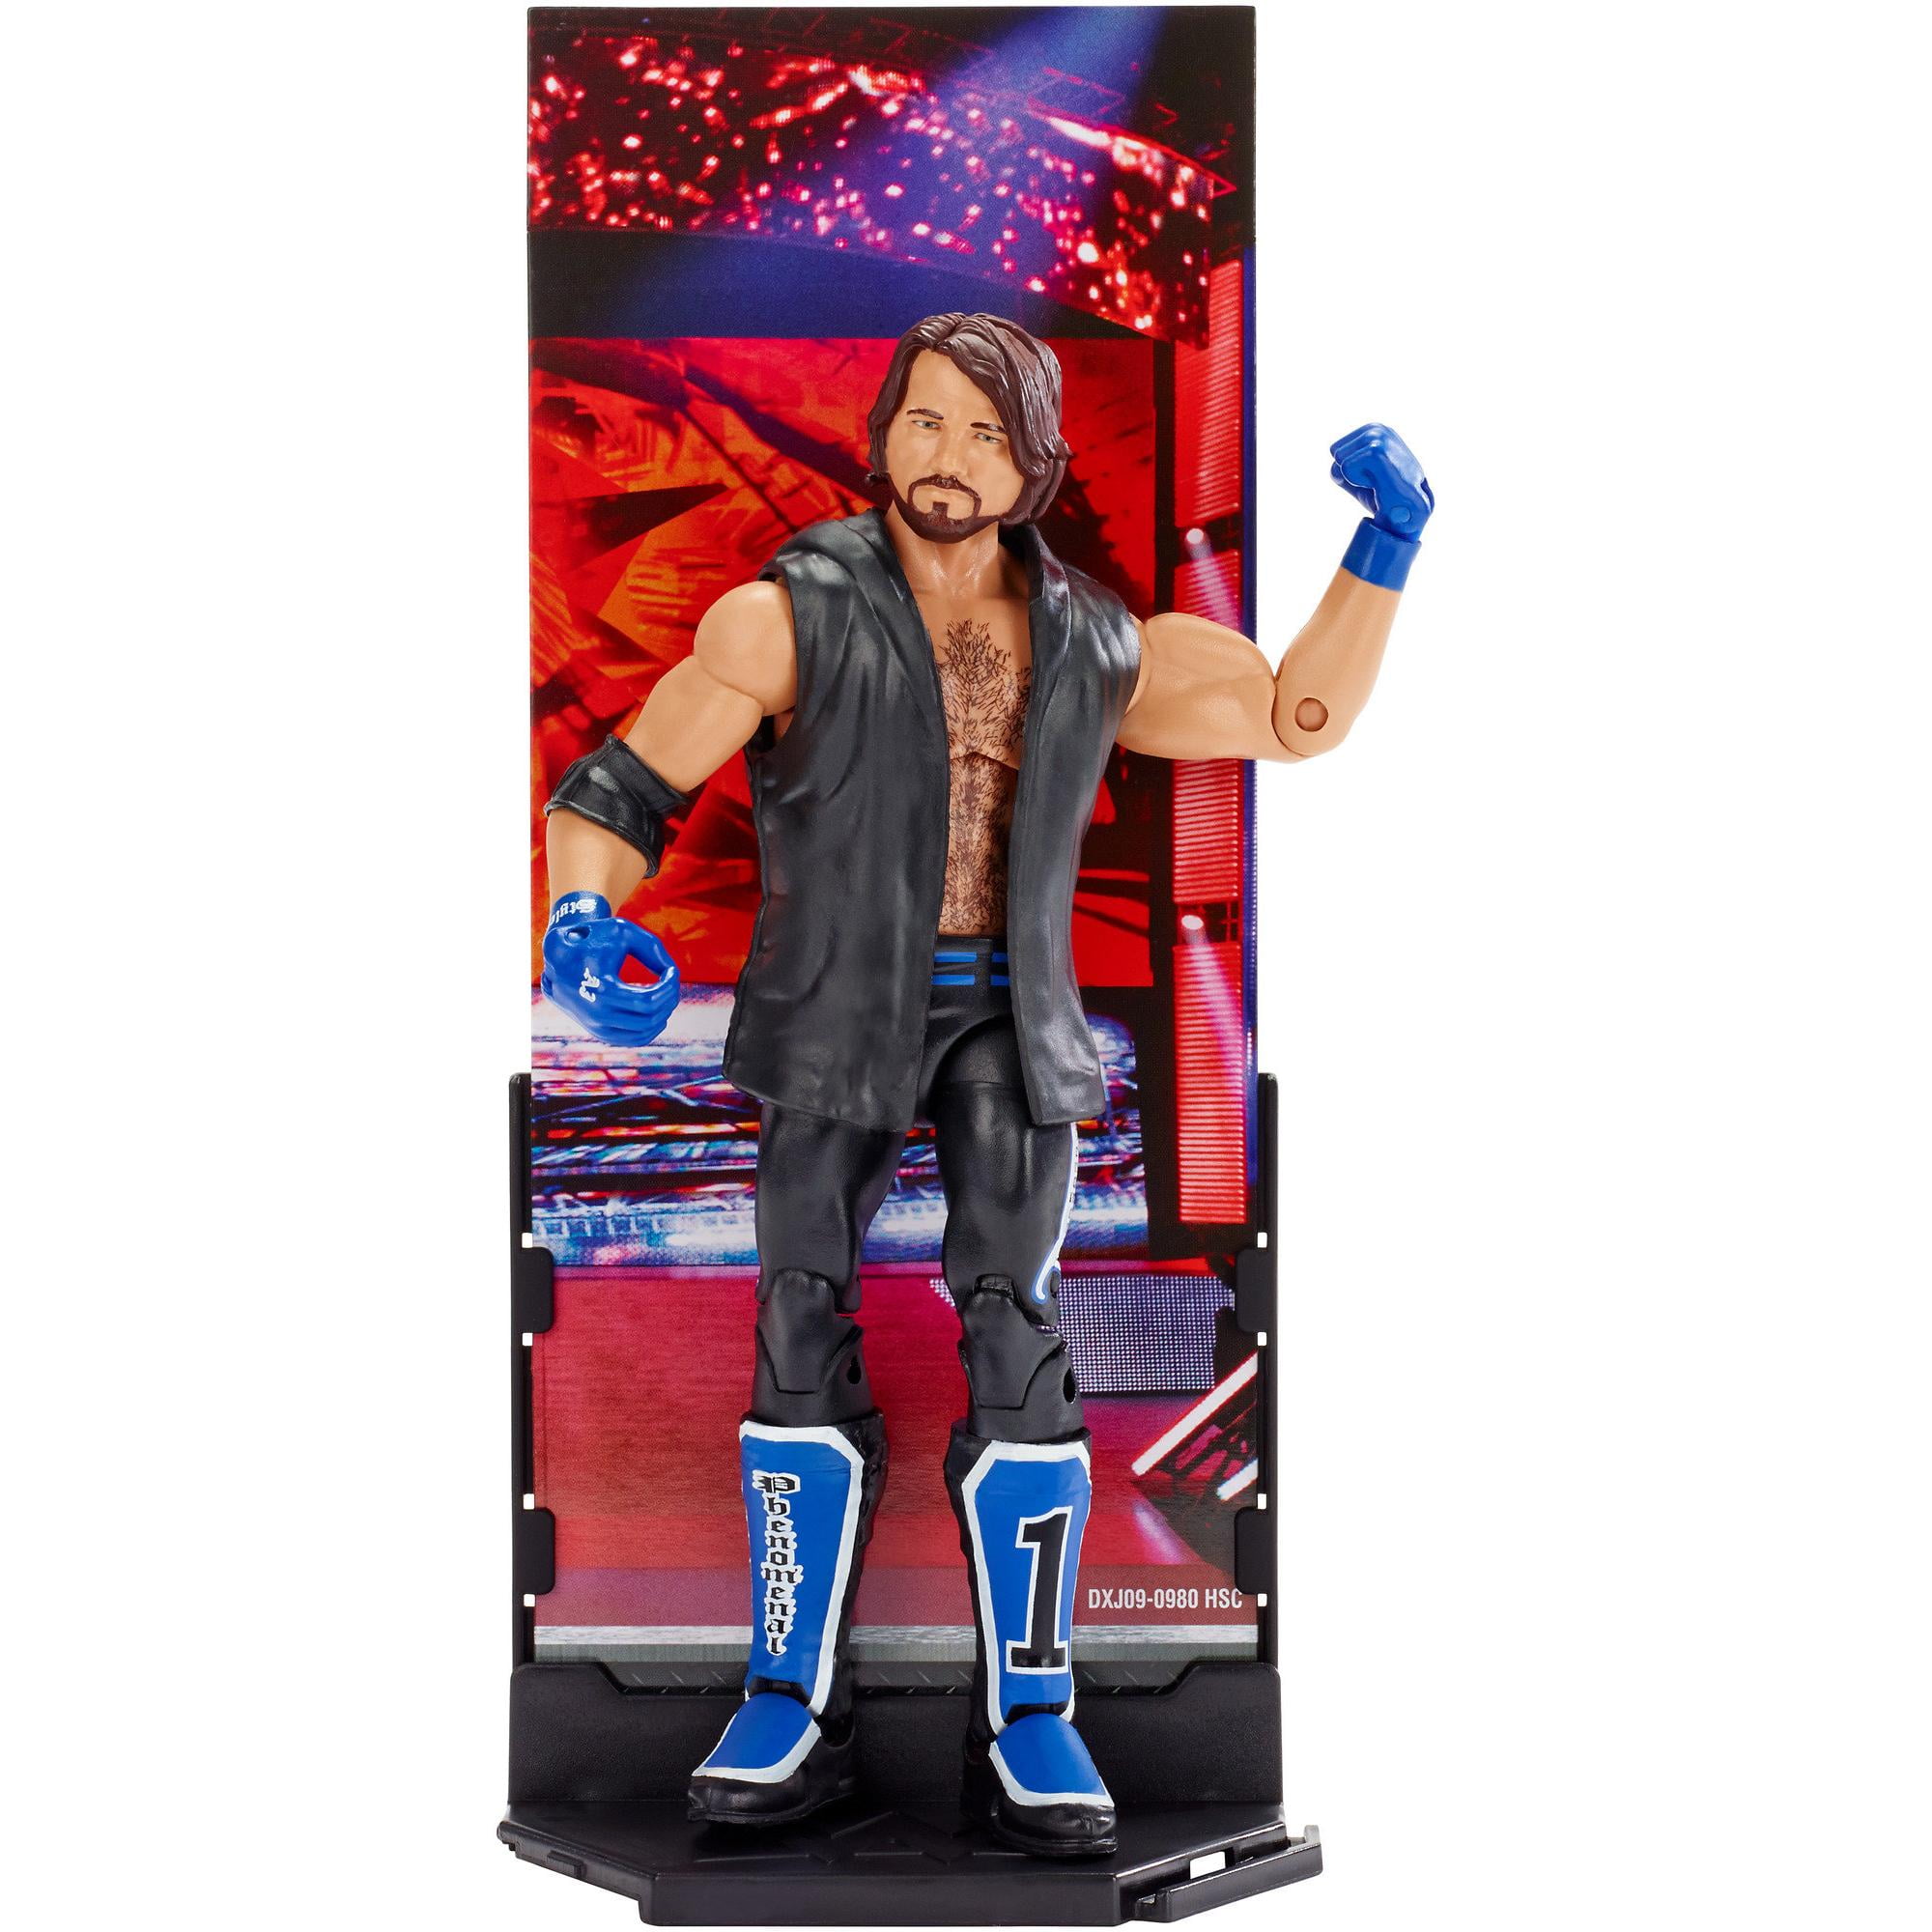  Mattel WWE Elite Action Figure AJ Styles with Accessory :  Everything Else